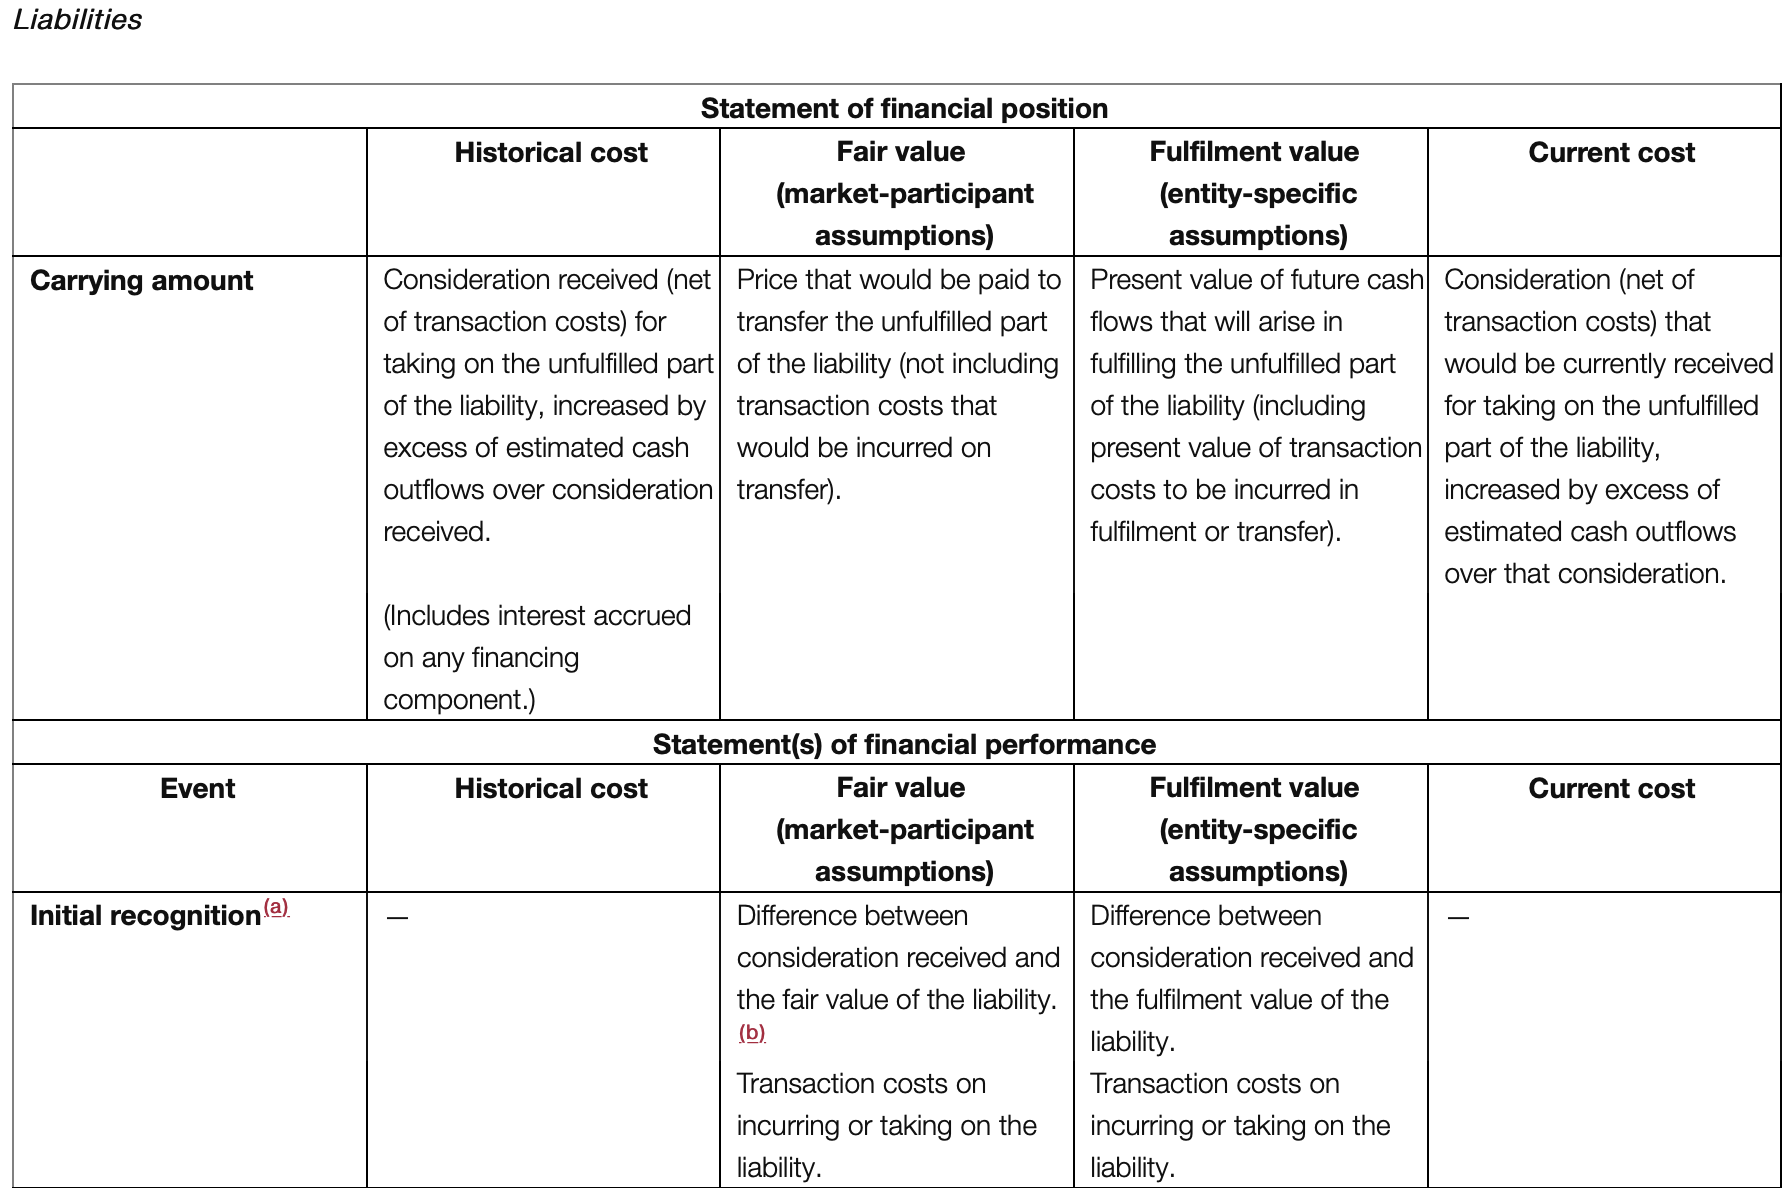 Table of liabilities 1